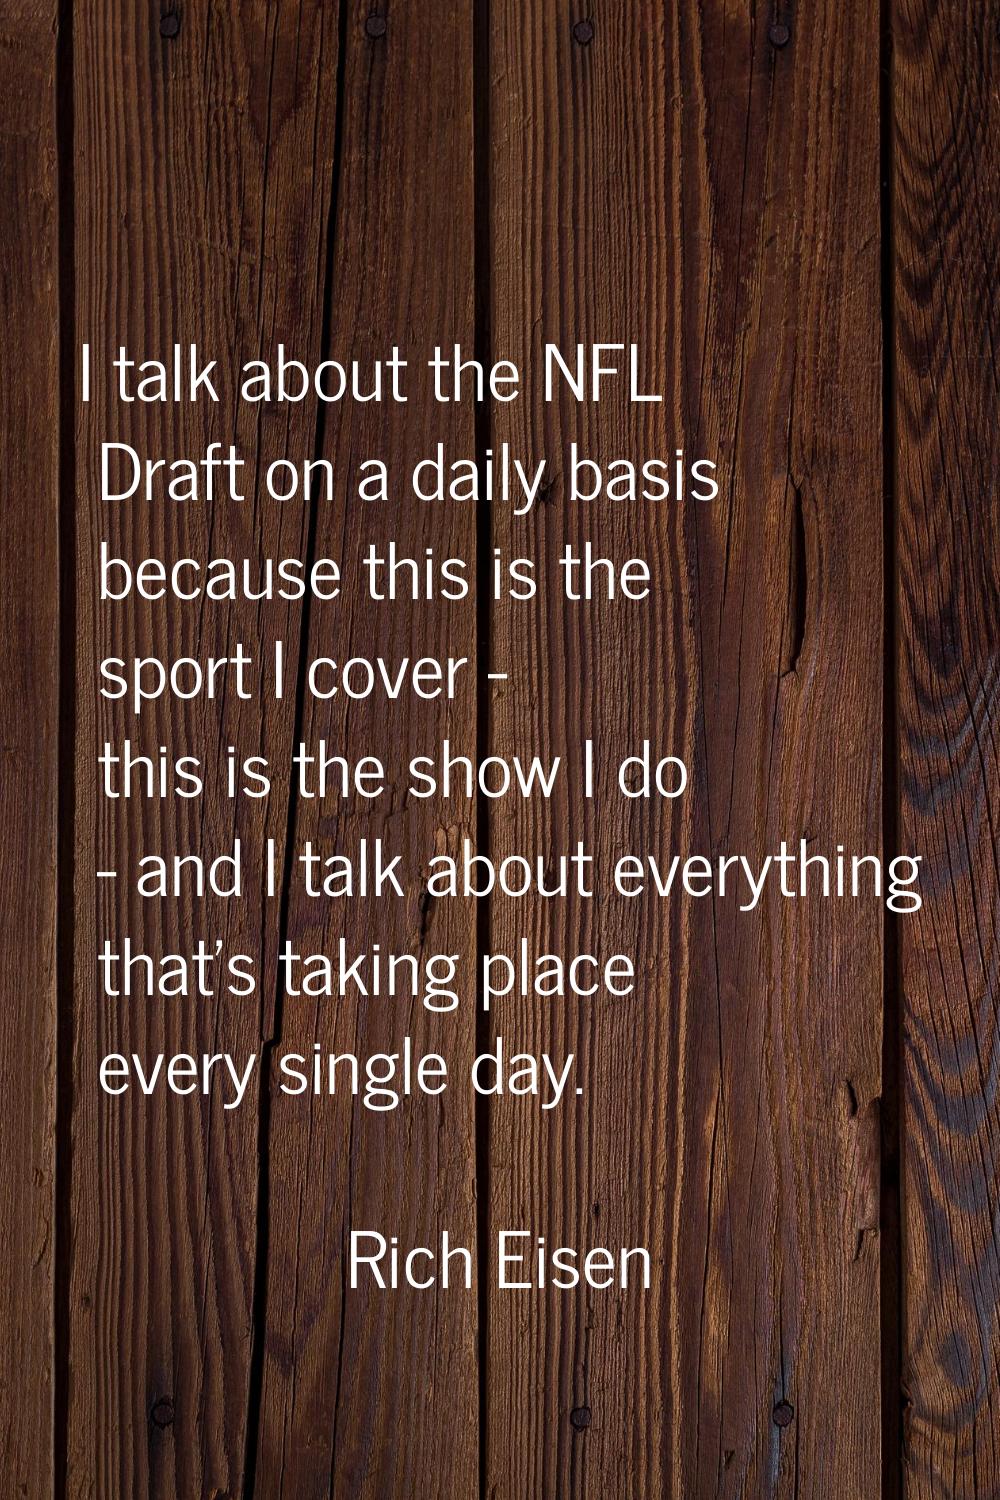 I talk about the NFL Draft on a daily basis because this is the sport I cover - this is the show I 